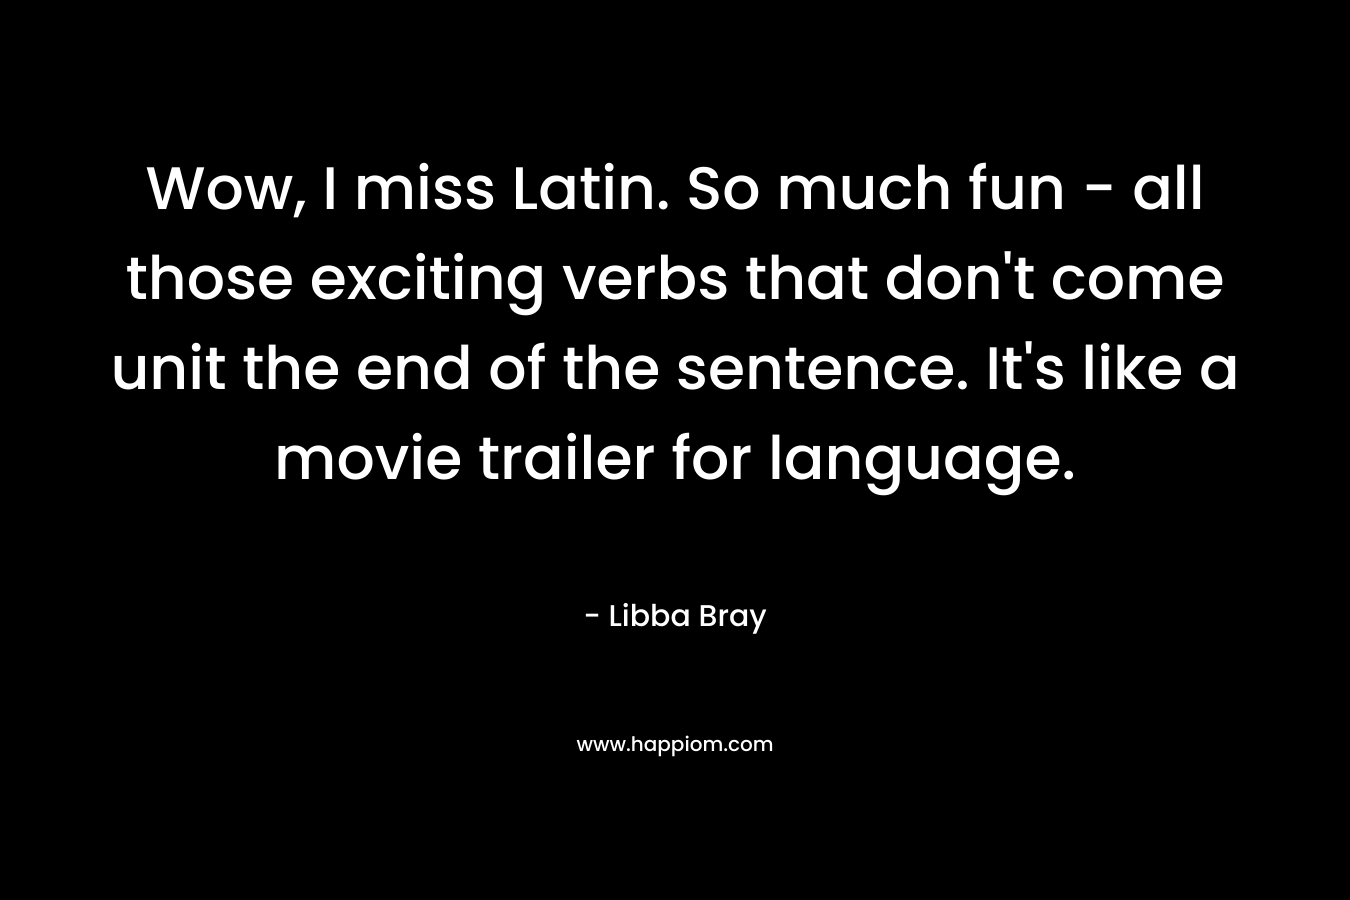 Wow, I miss Latin. So much fun – all those exciting verbs that don’t come unit the end of the sentence. It’s like a movie trailer for language. – Libba Bray